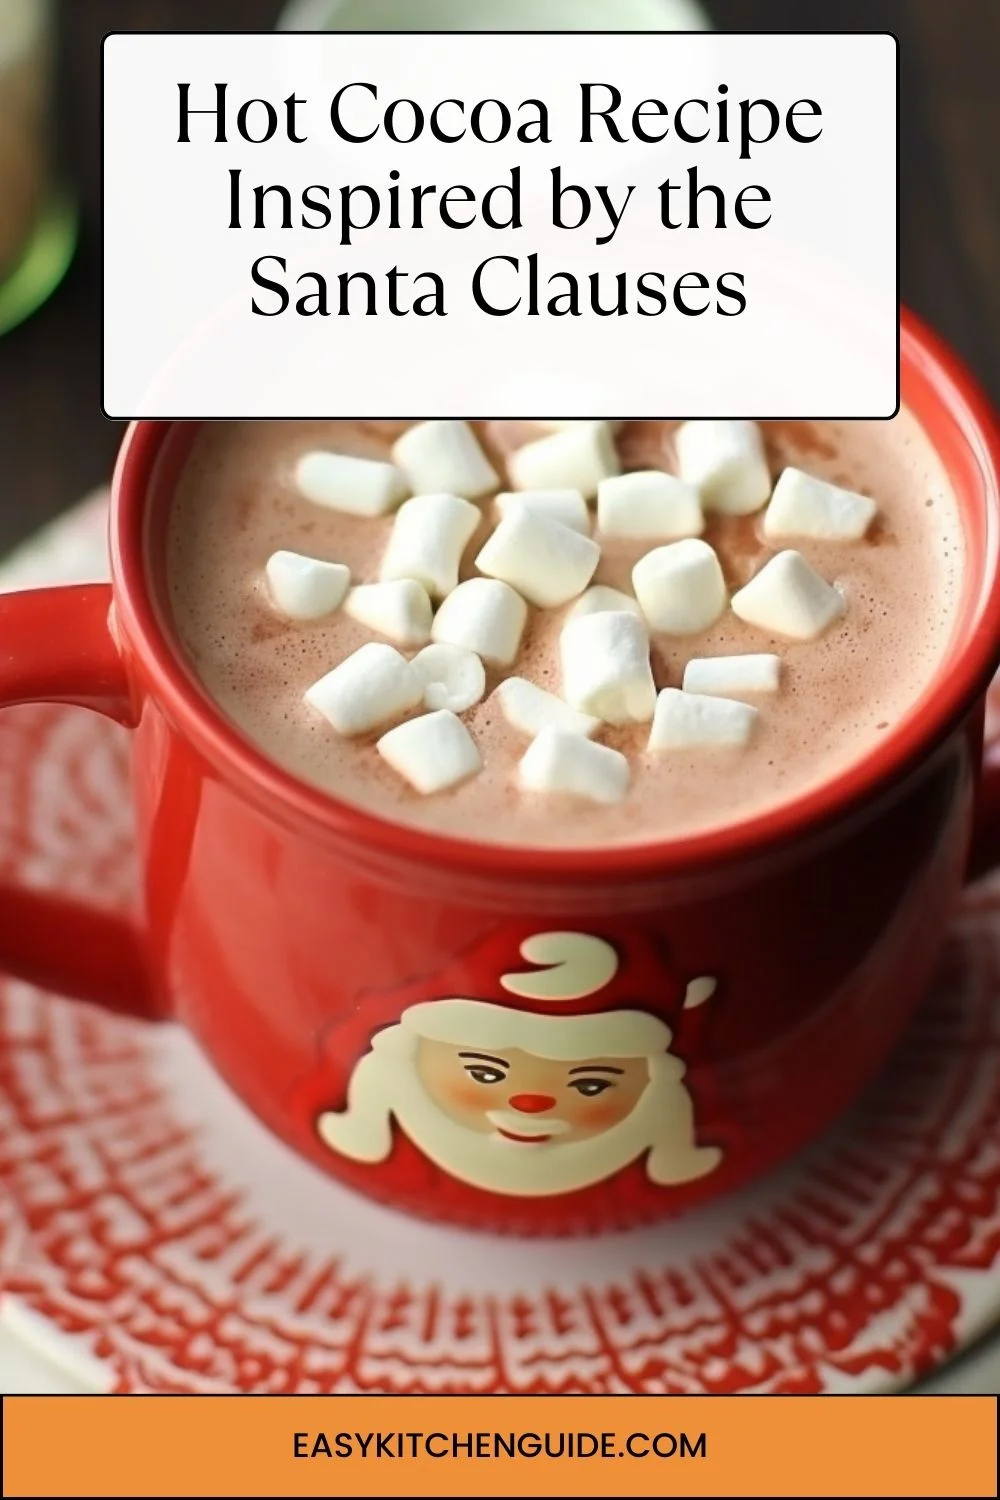 Hot Cocoa Recipe Inspired by the Santa Clauses